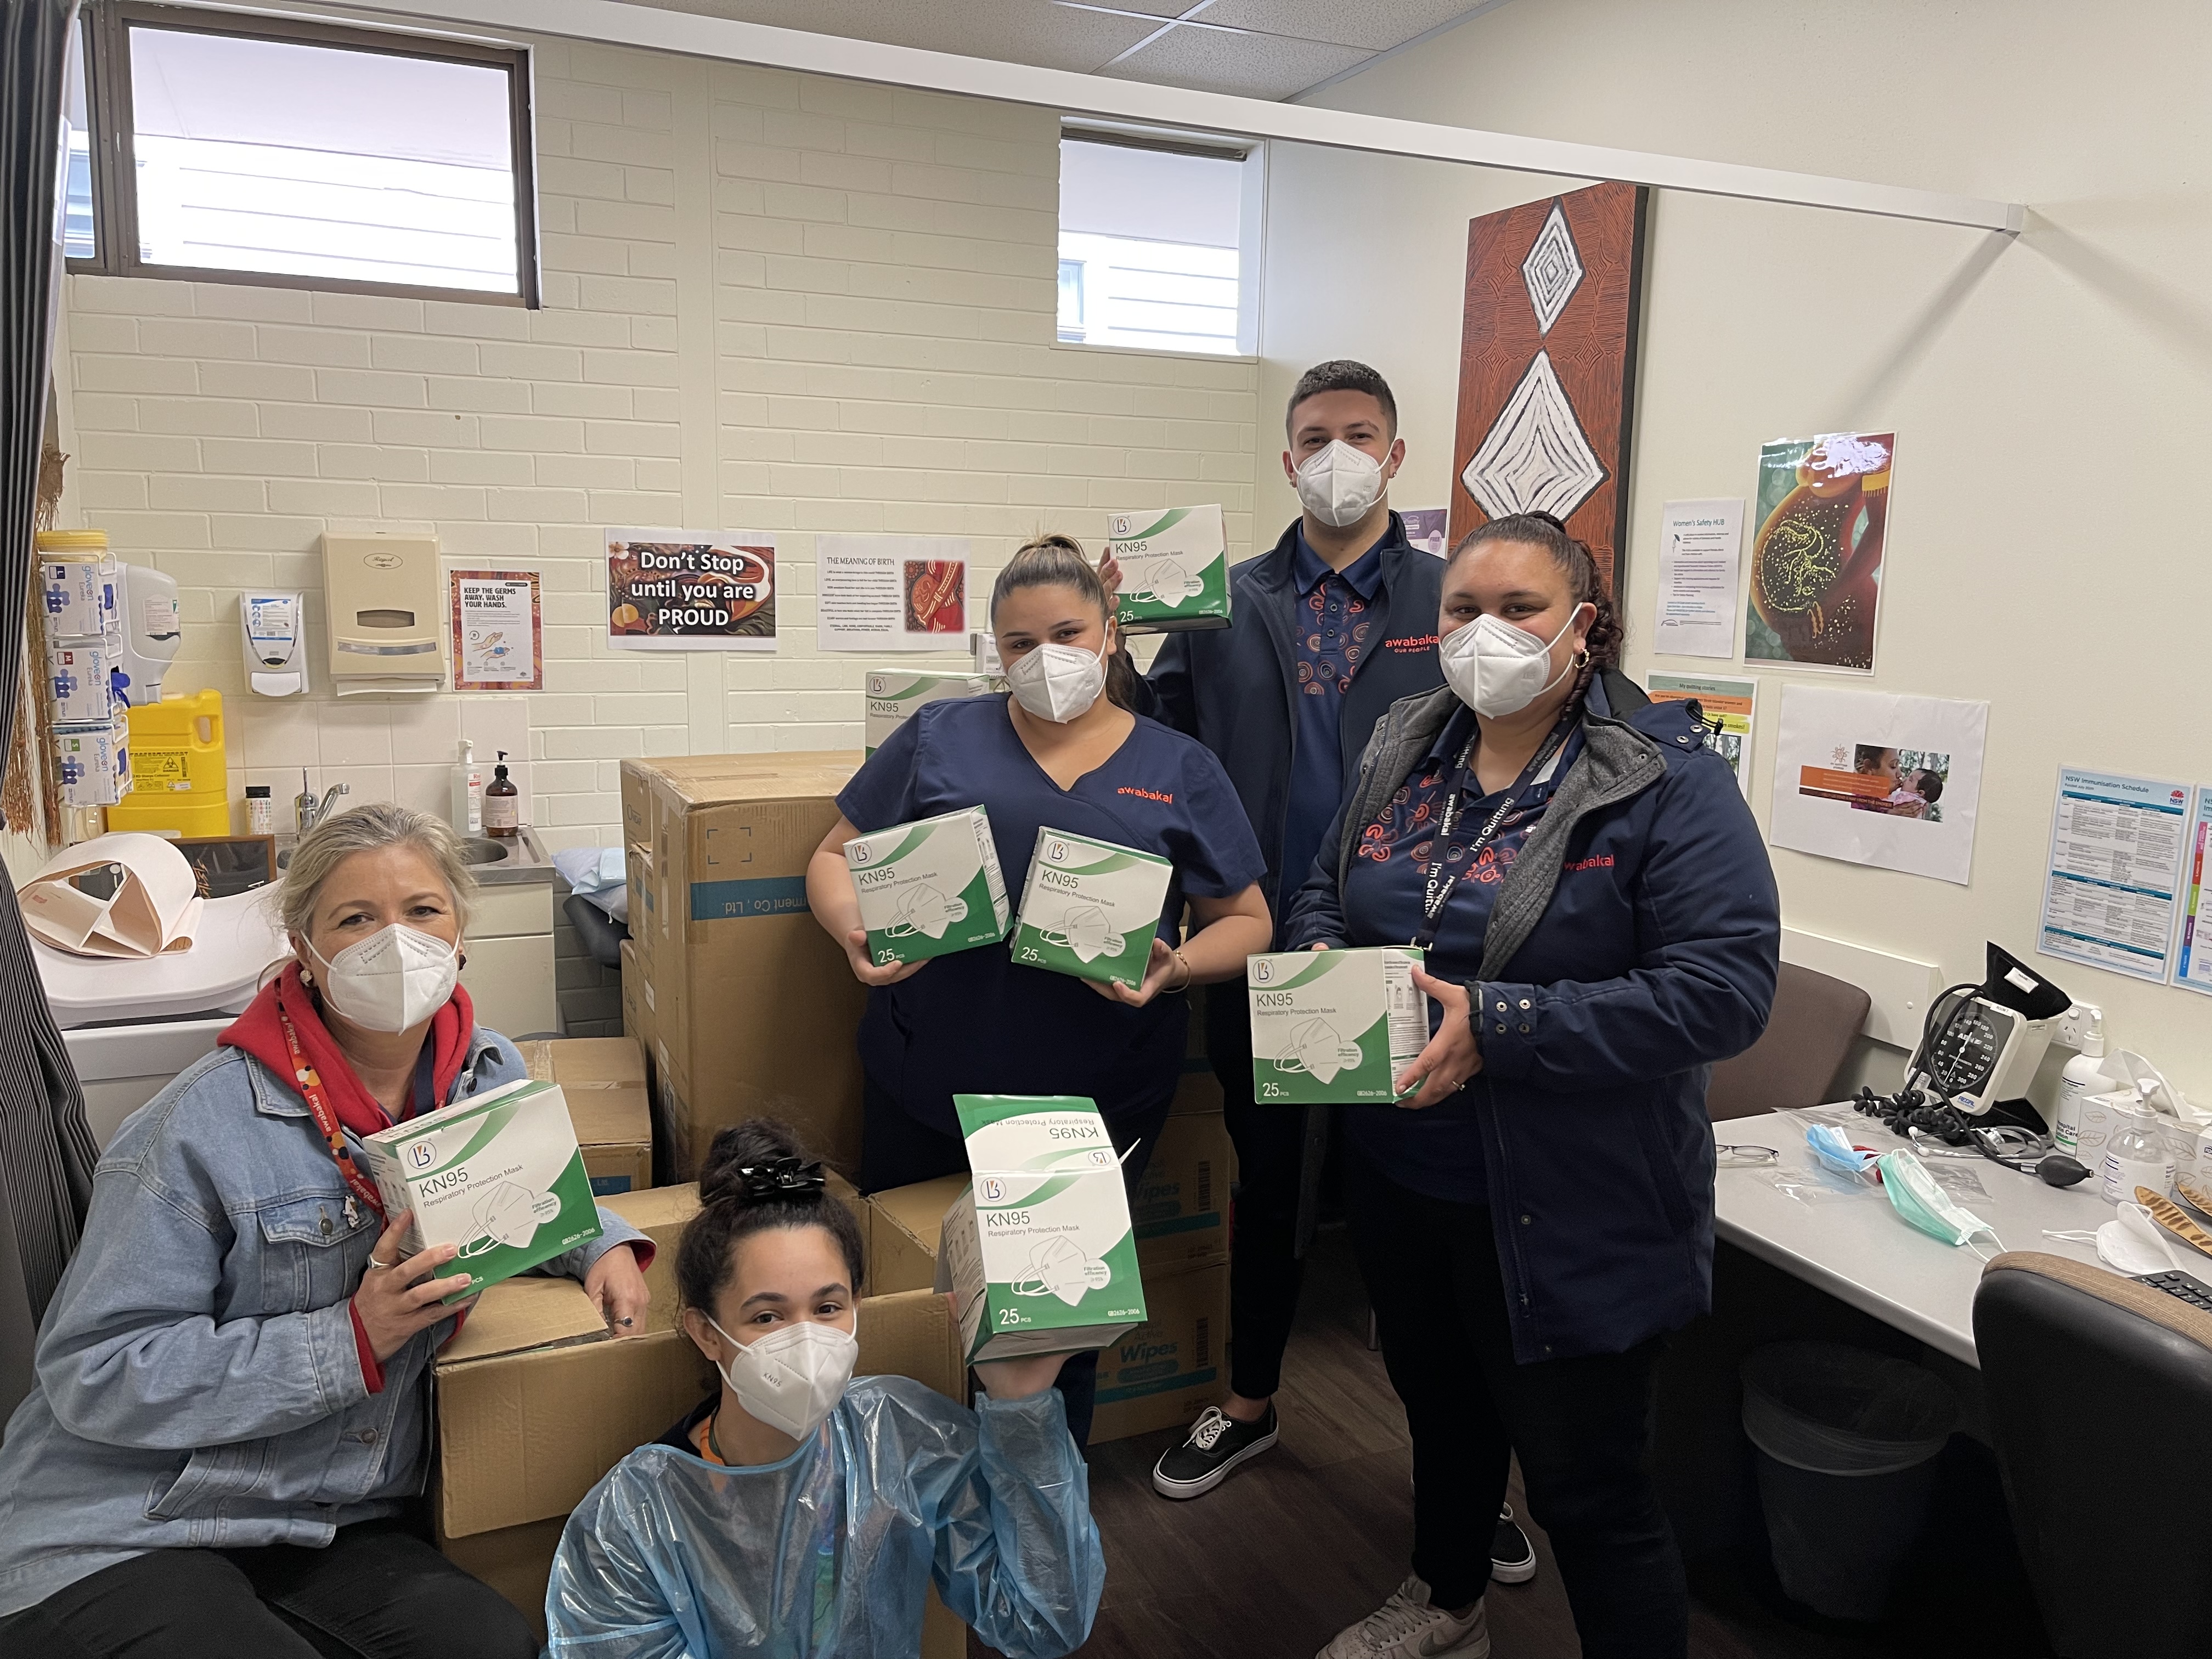 Group image of healthcare workers in masks with mask delivery 